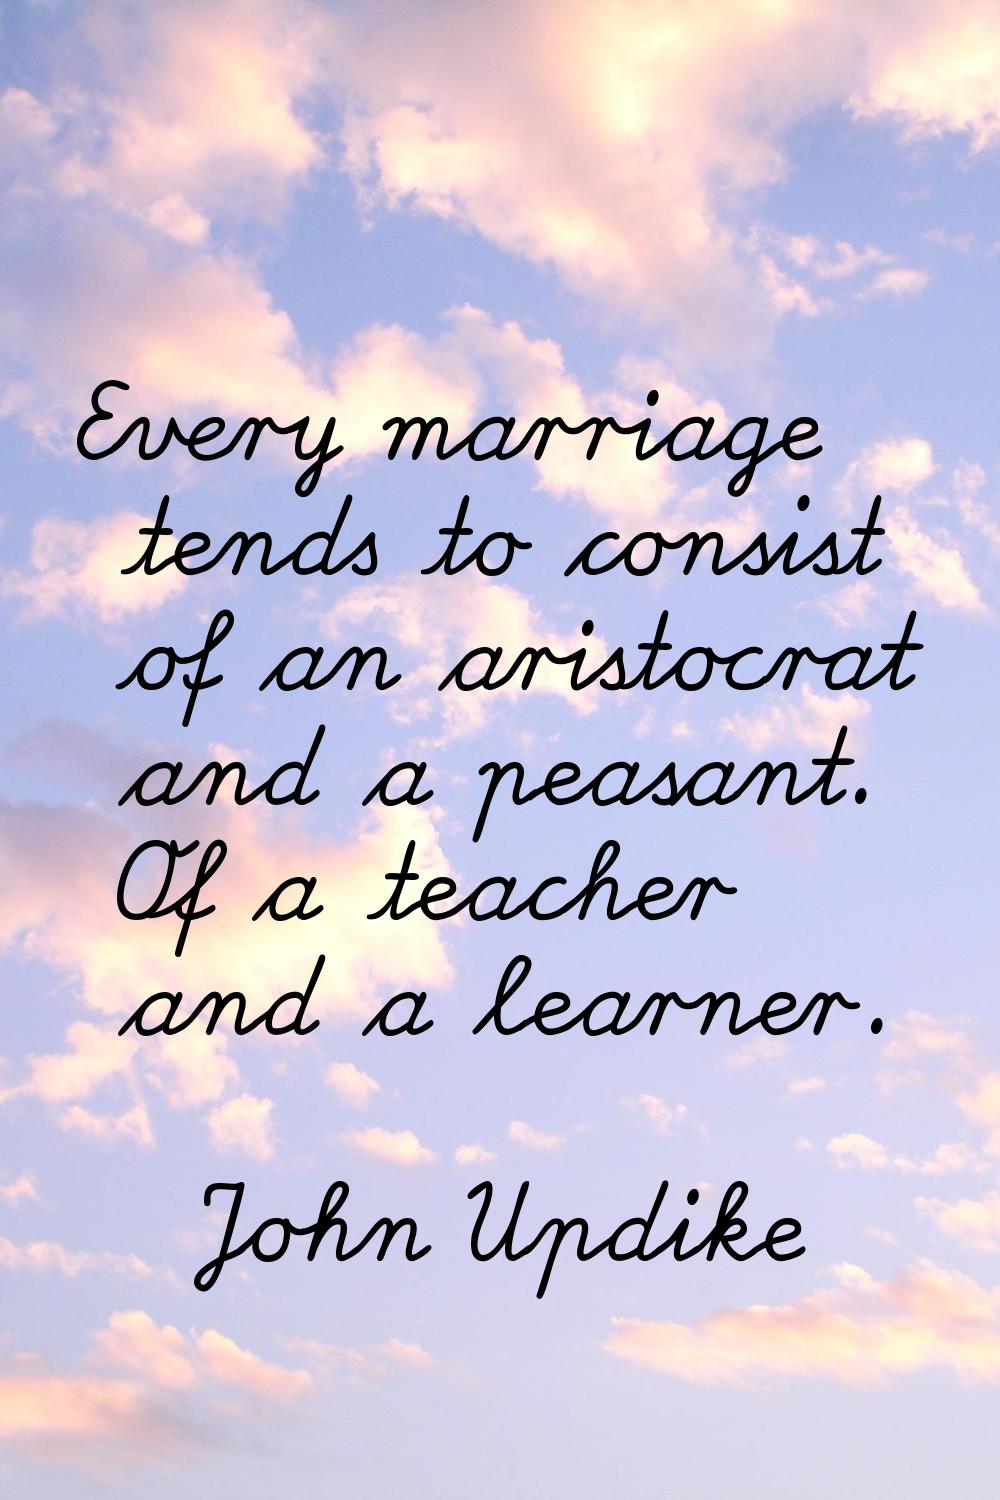 Every marriage tends to consist of an aristocrat and a peasant. Of a teacher and a learner.